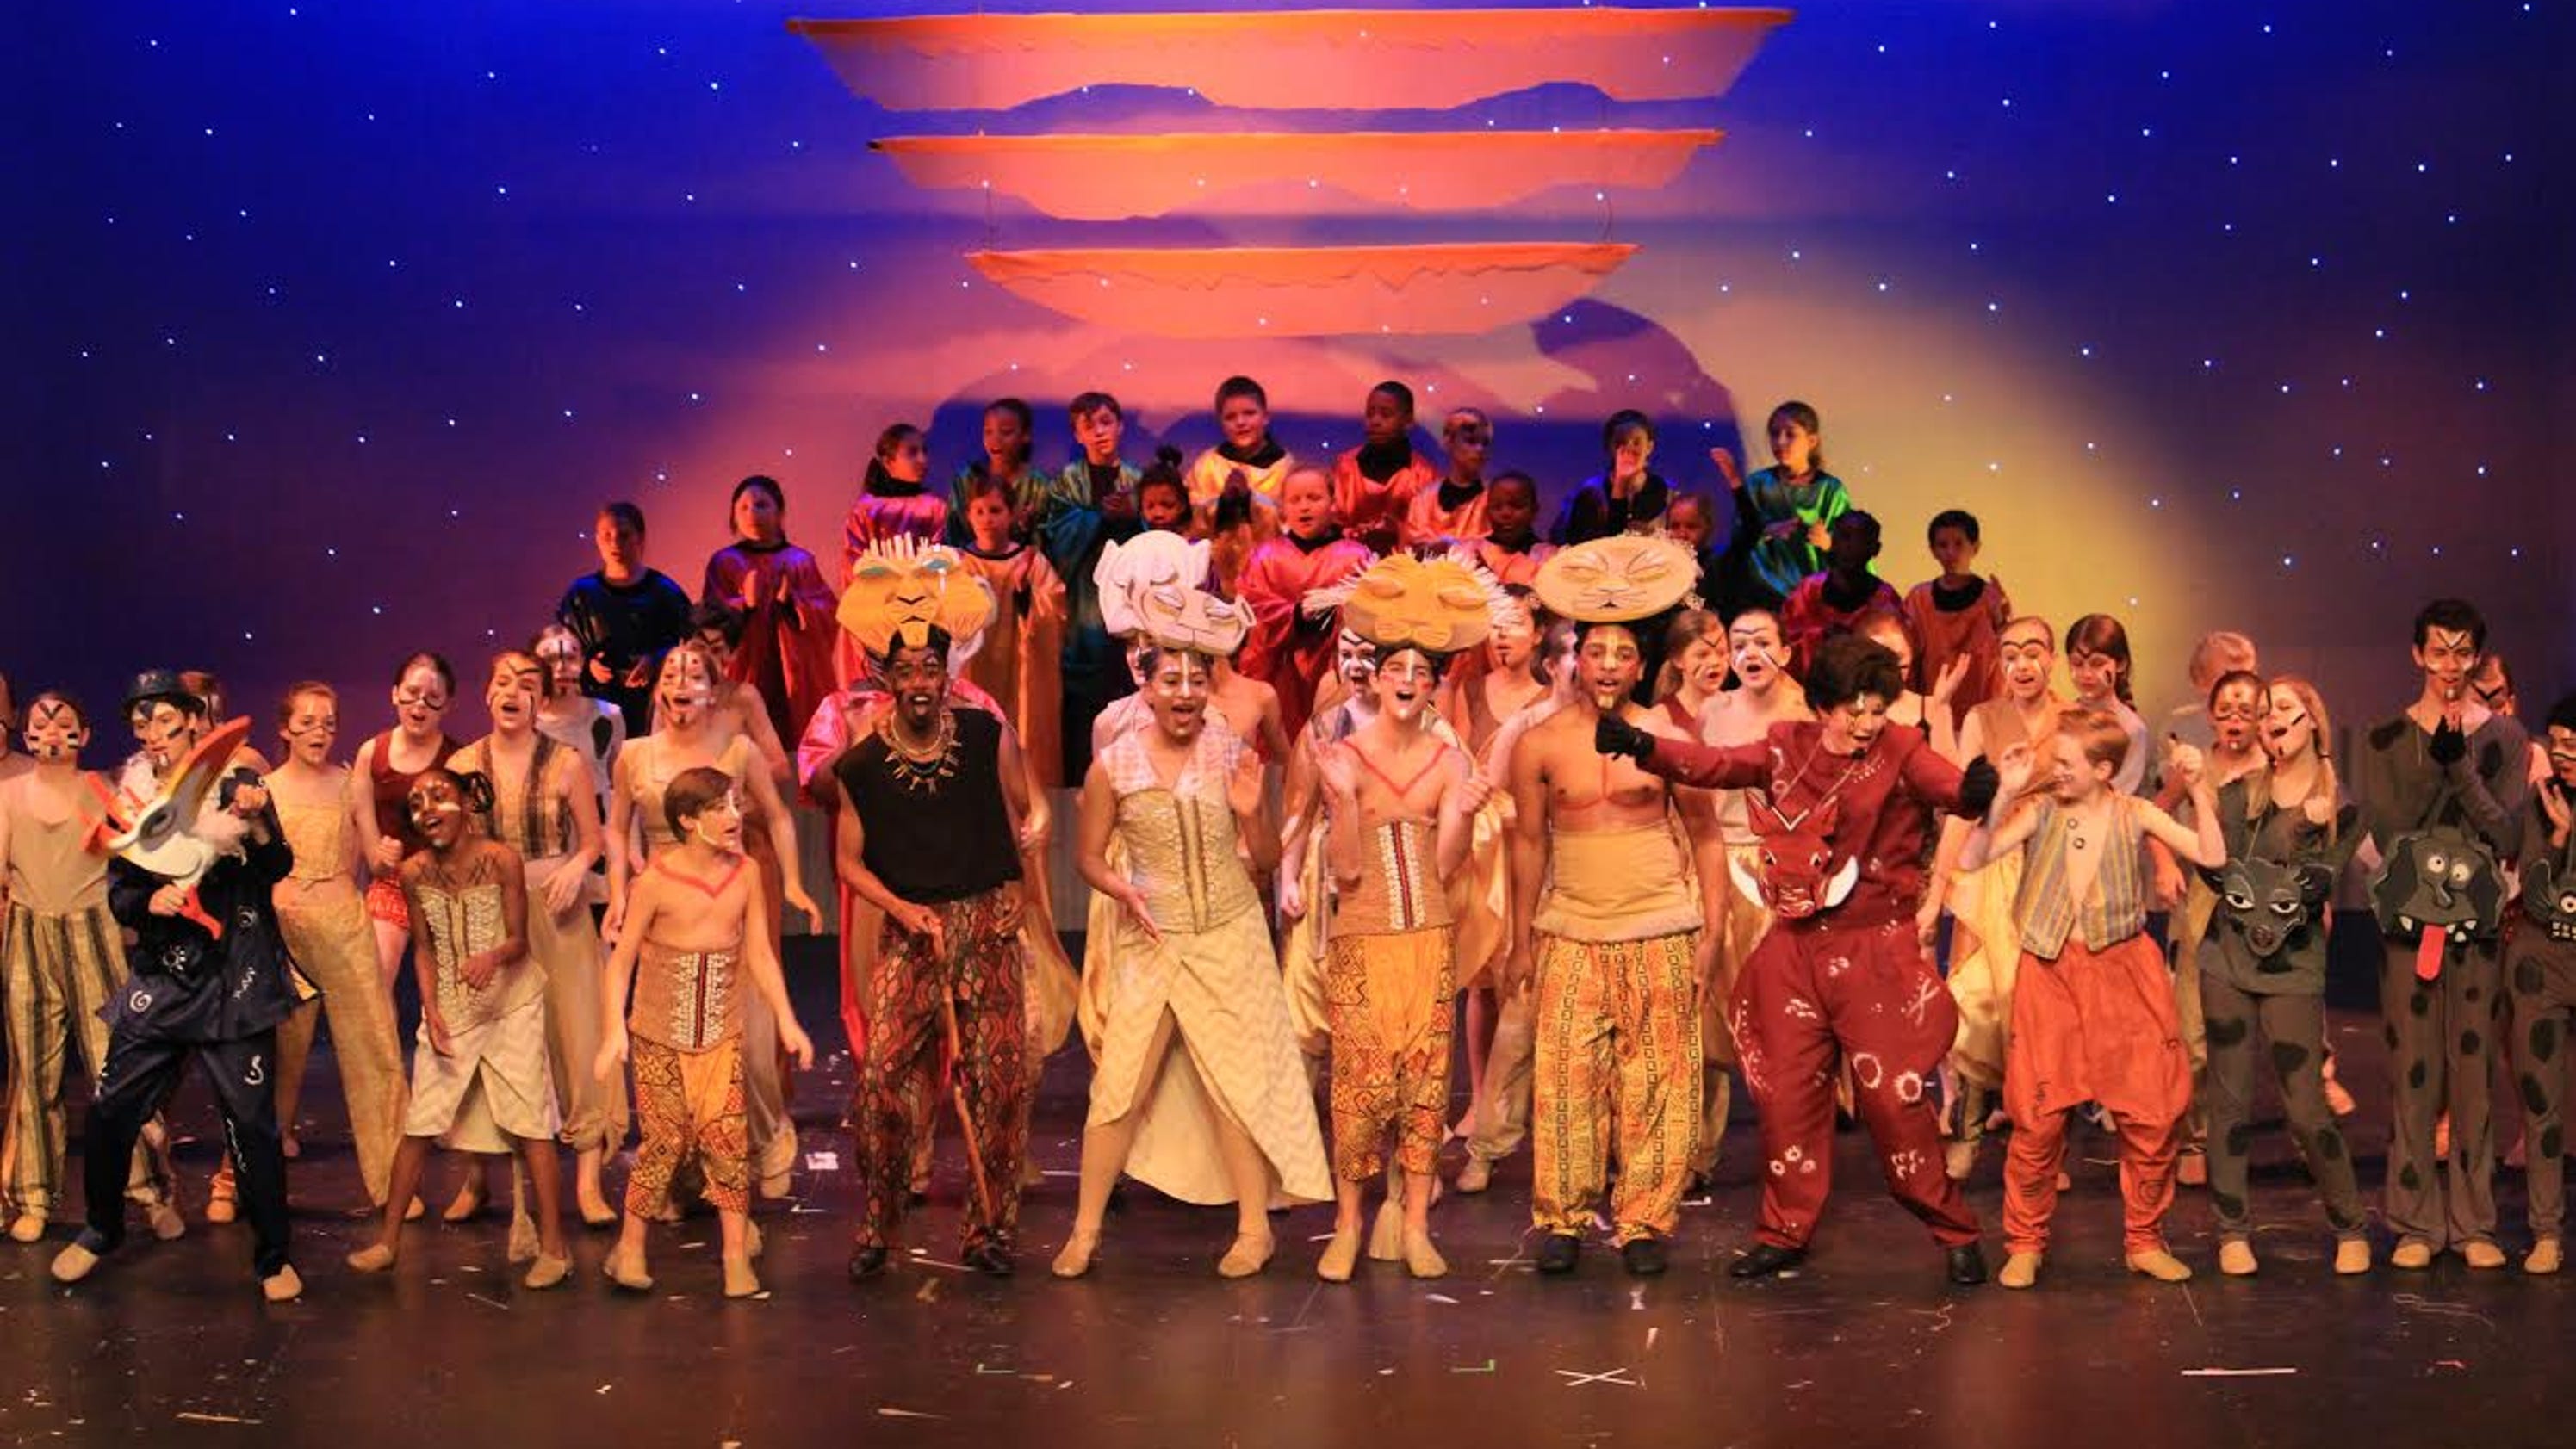 download the kennedy center lion king